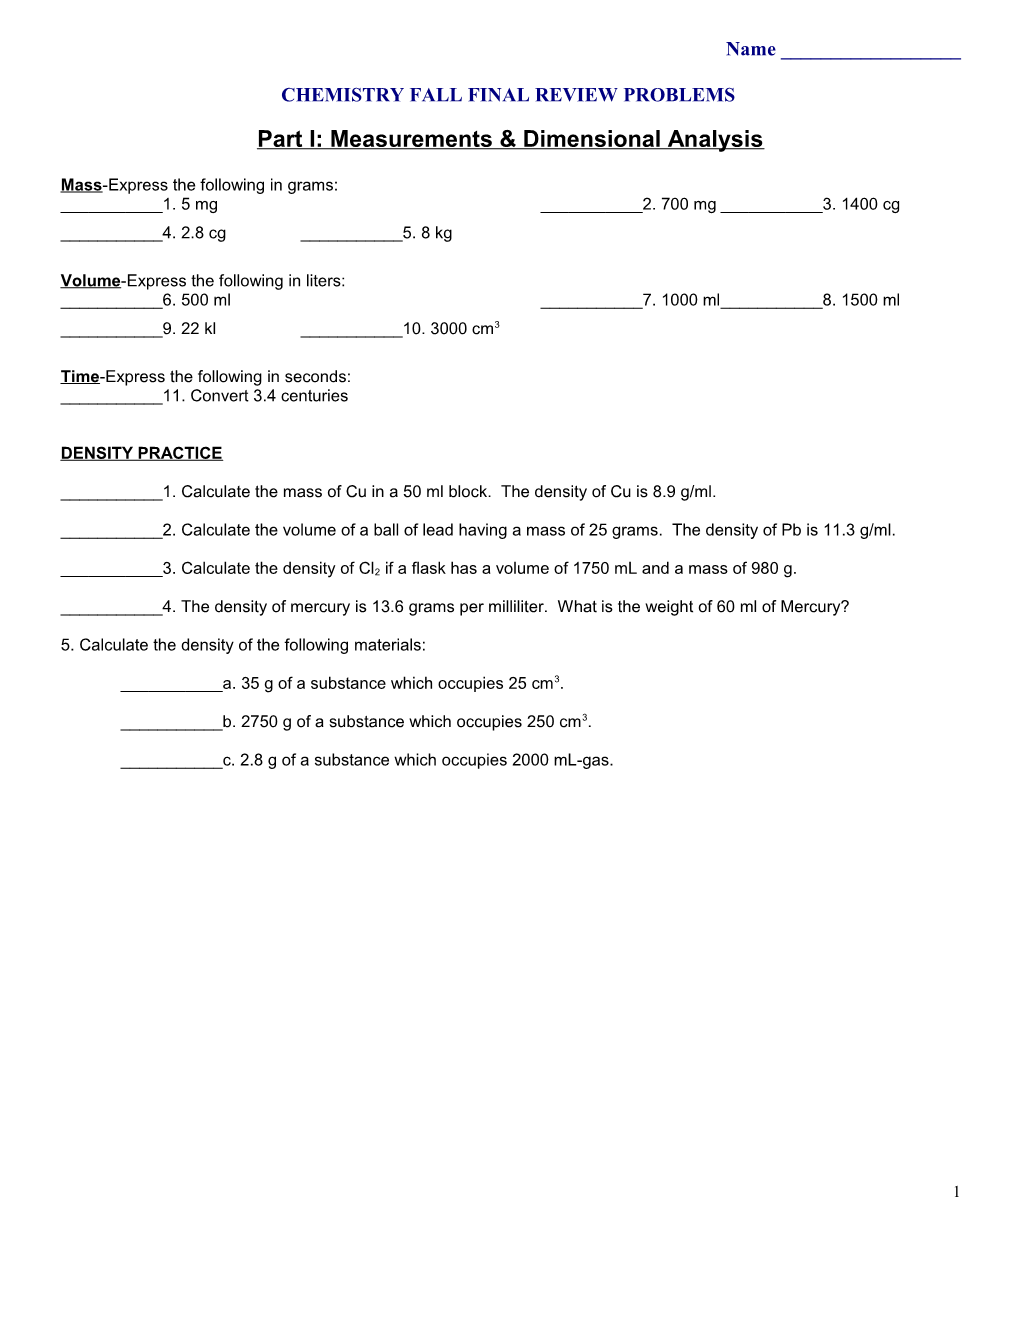 Chemistry Fall Final Review Problems 2015